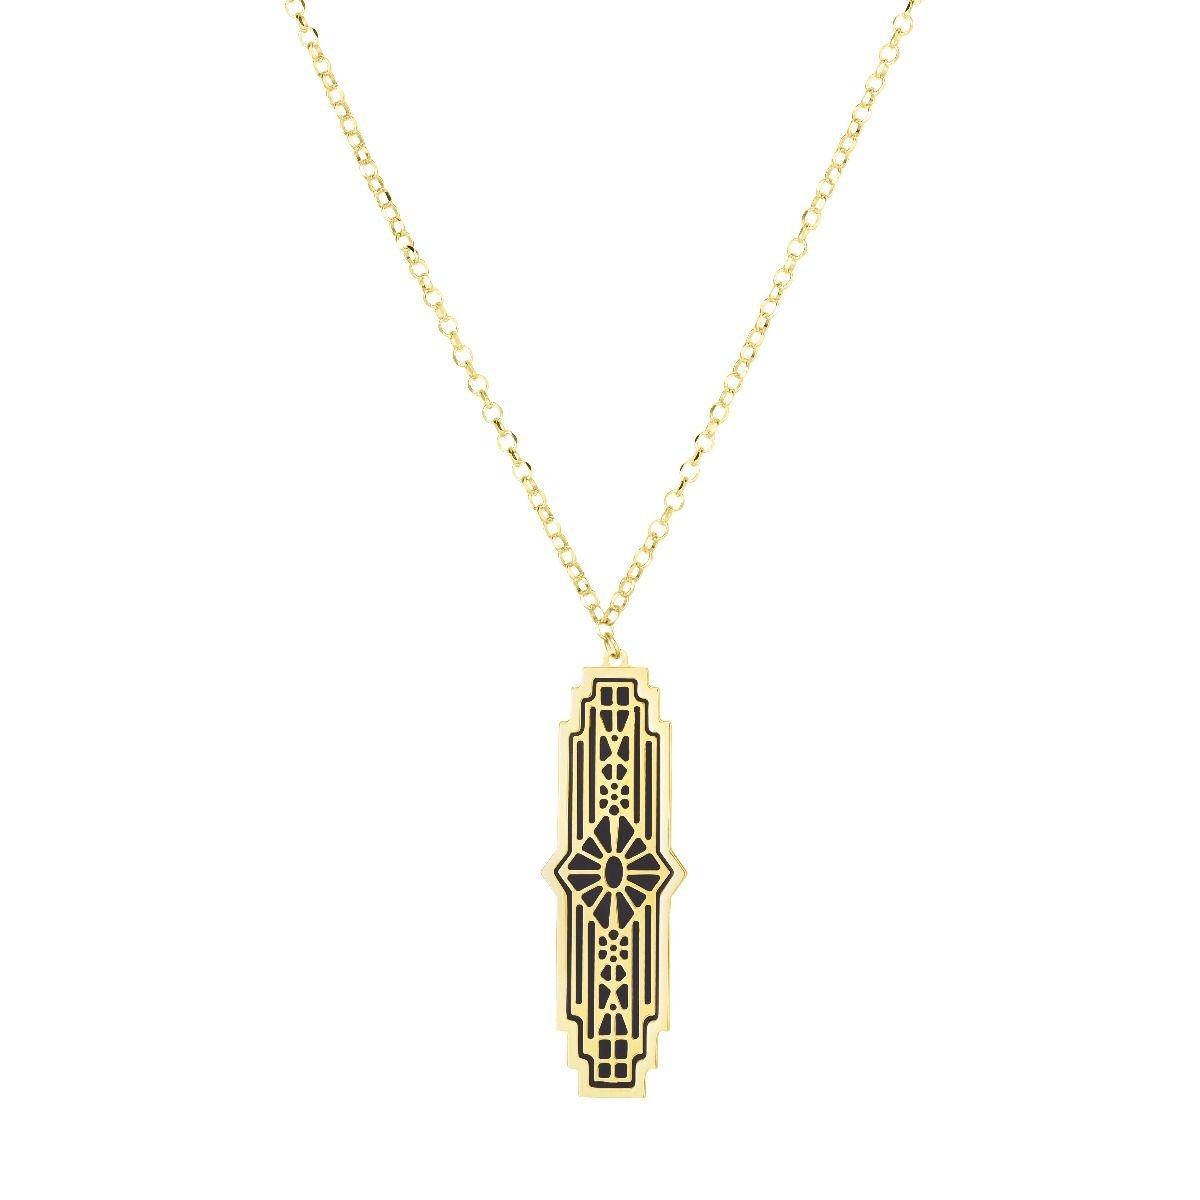 14K Yellow Gold Mother of Pearl, Black Onyx Art Deco Elongated Pendant Necklace,